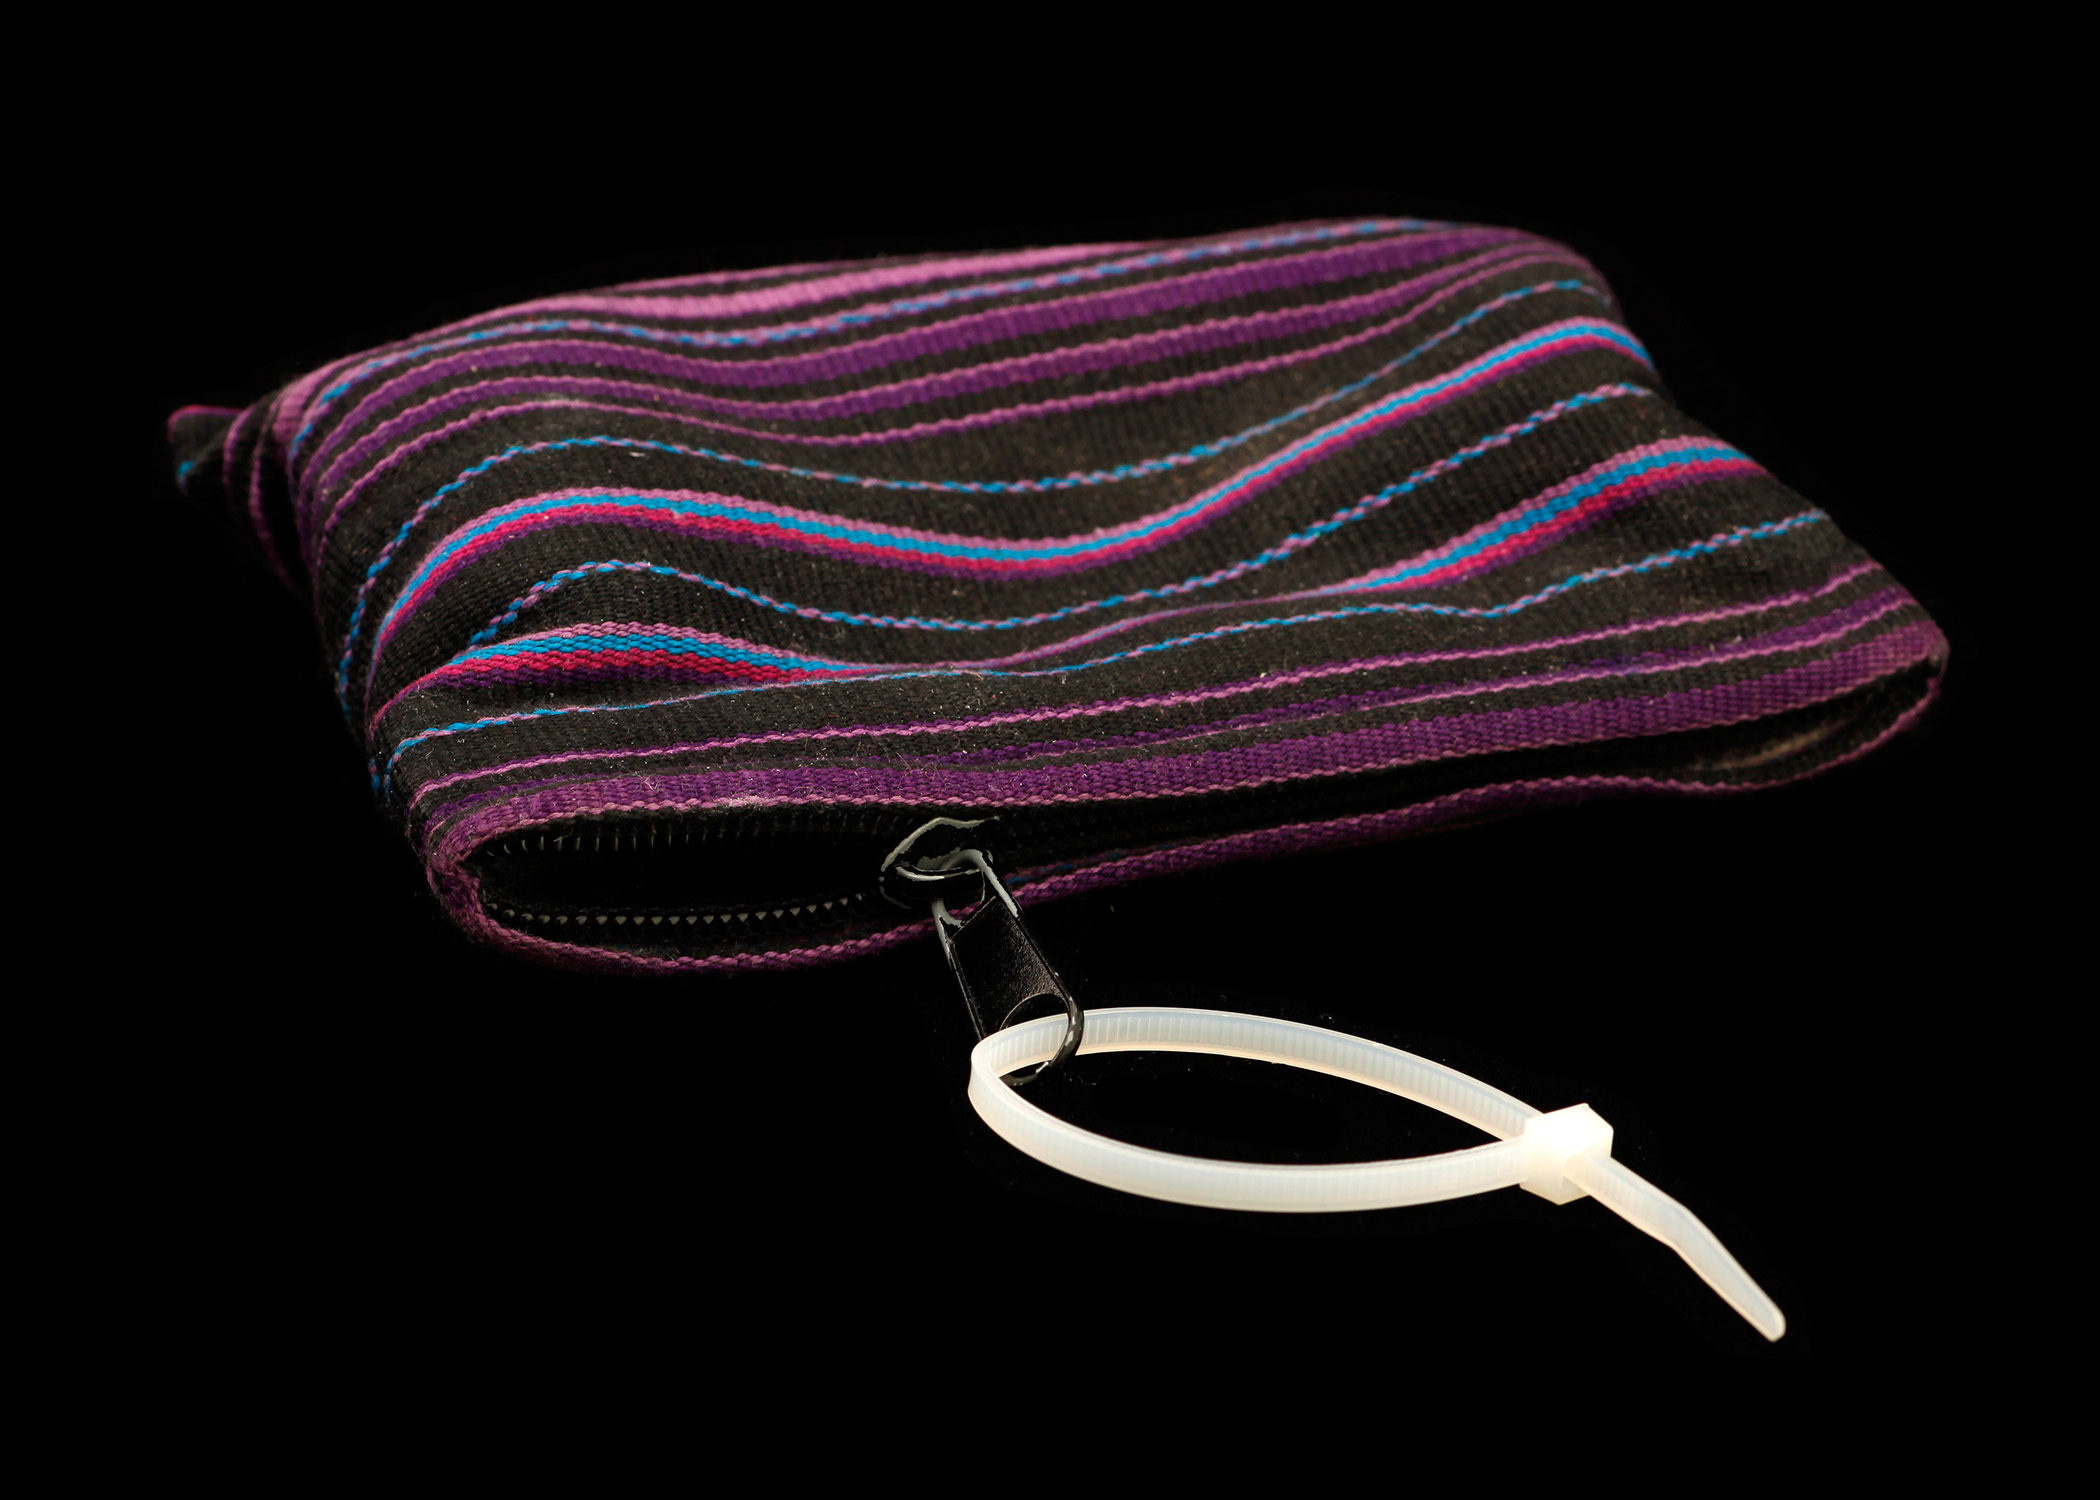 Image of small fabric pouch with zipper closure. The zipper has a white cable tie loosely affixed through it so that it forms a loop of perhaps 2" diameter.